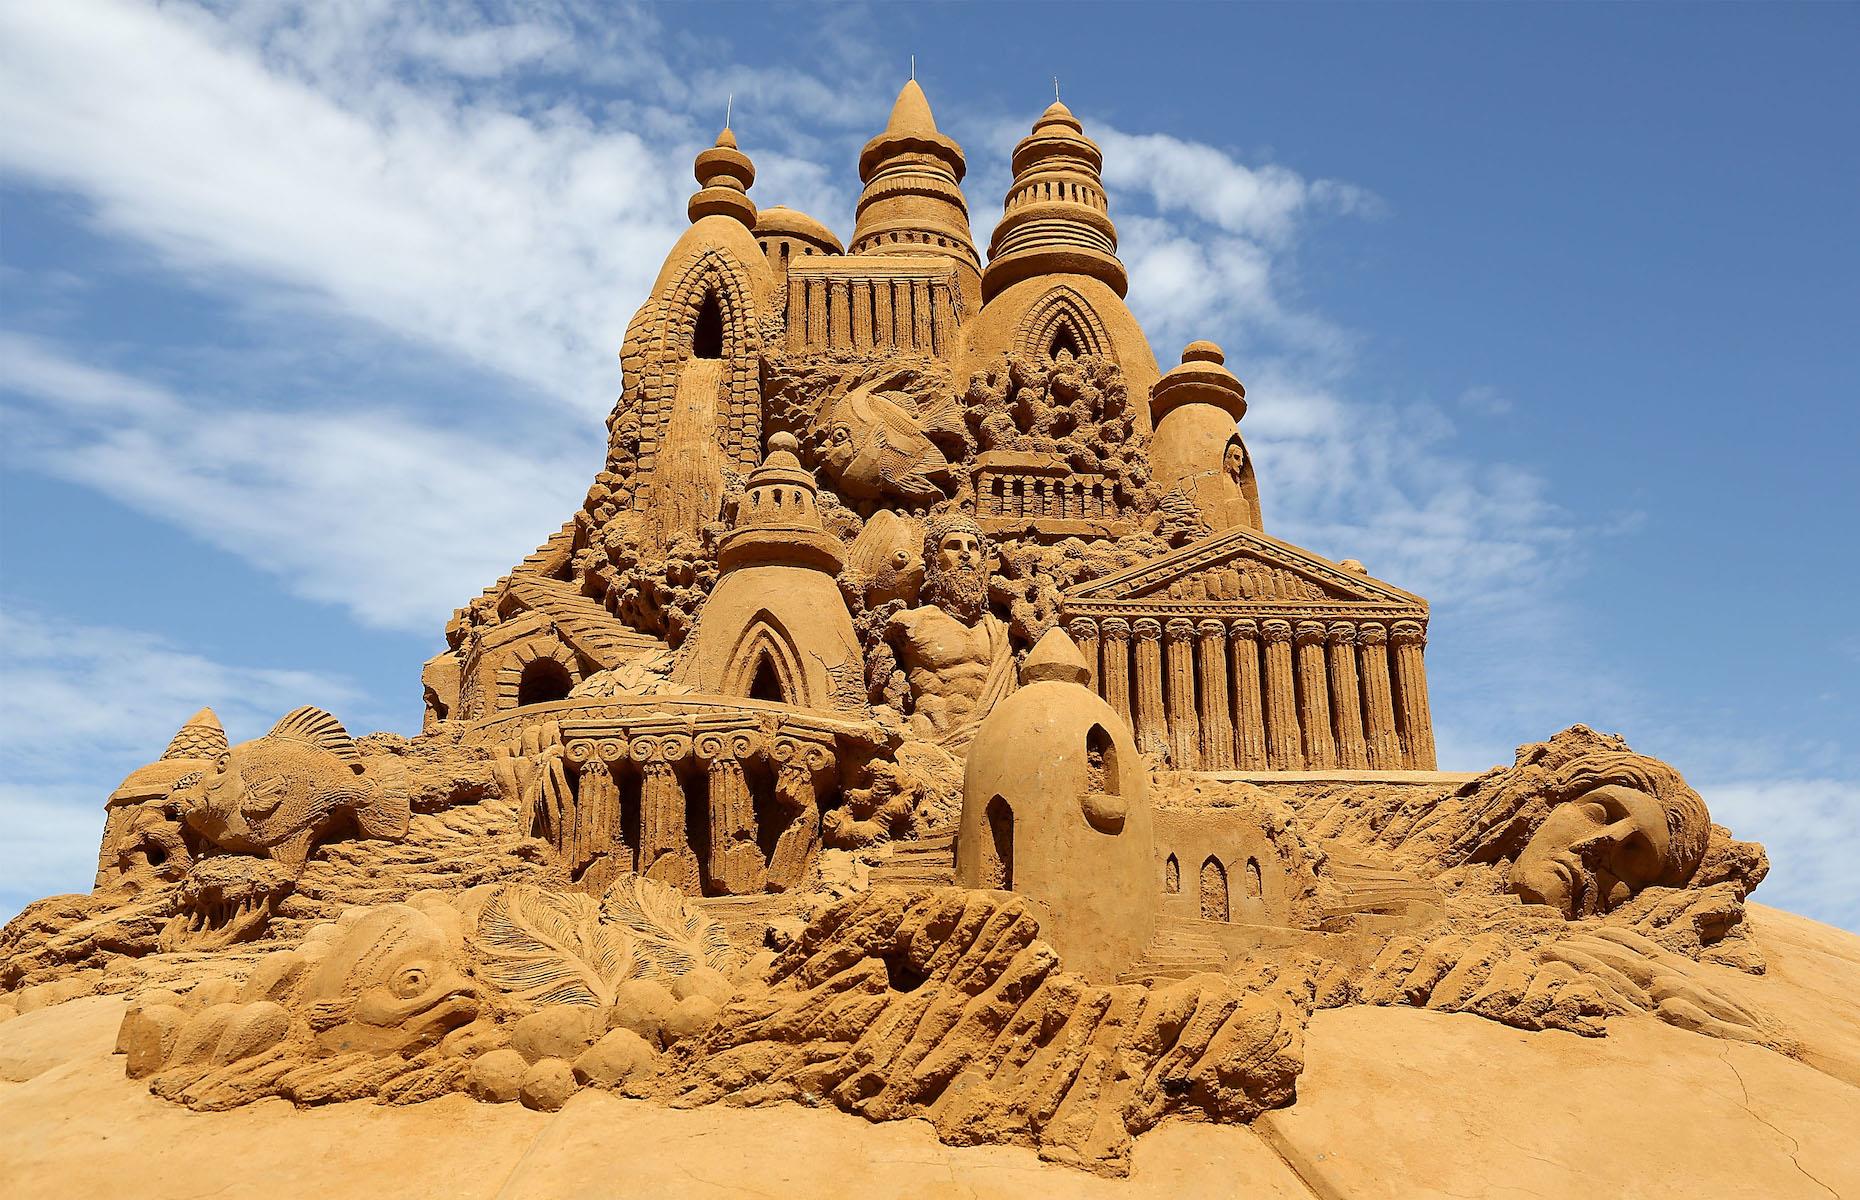 This epic scene of the legendary lost ancient city of Atlantis was carved by artists Sandis Kondis and Sue McGrew as part of an Under the Sea sand sculpture exhibition held in Frankston on the Mornington Peninsula in 2013. With its gorgeous sandy beach, foreshore boardwalk and pier, Frankston is prime sandcastle-building territory. Although, amateurs are unlikely to reach the heady heights of this imposing sand sculpture.